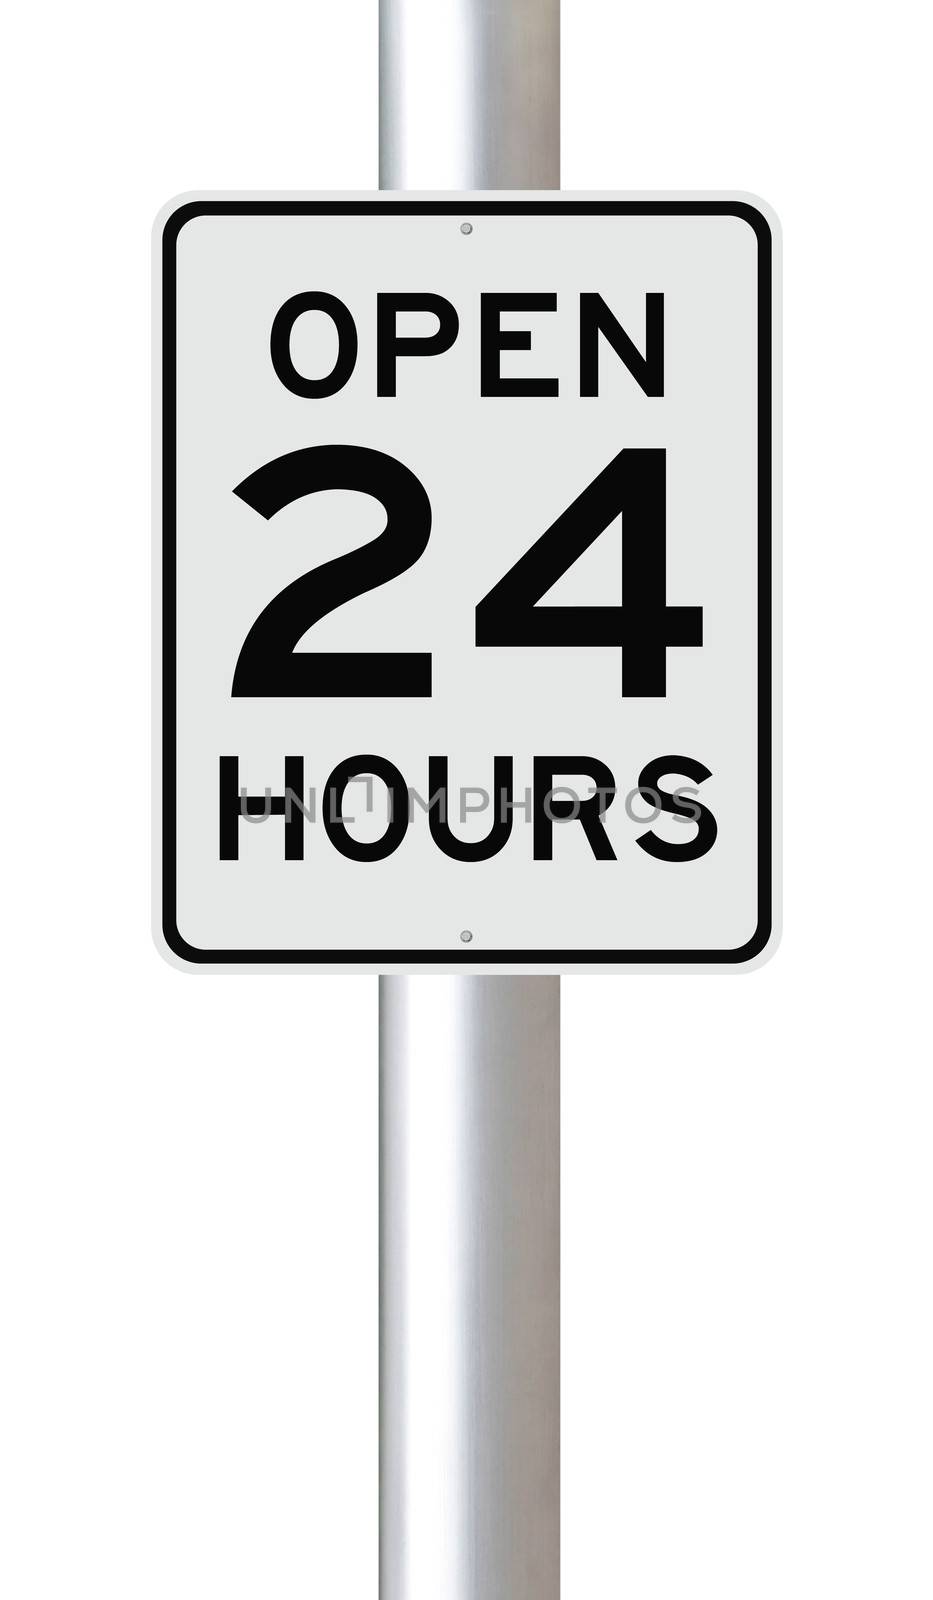 Open 24 Hours by rnl